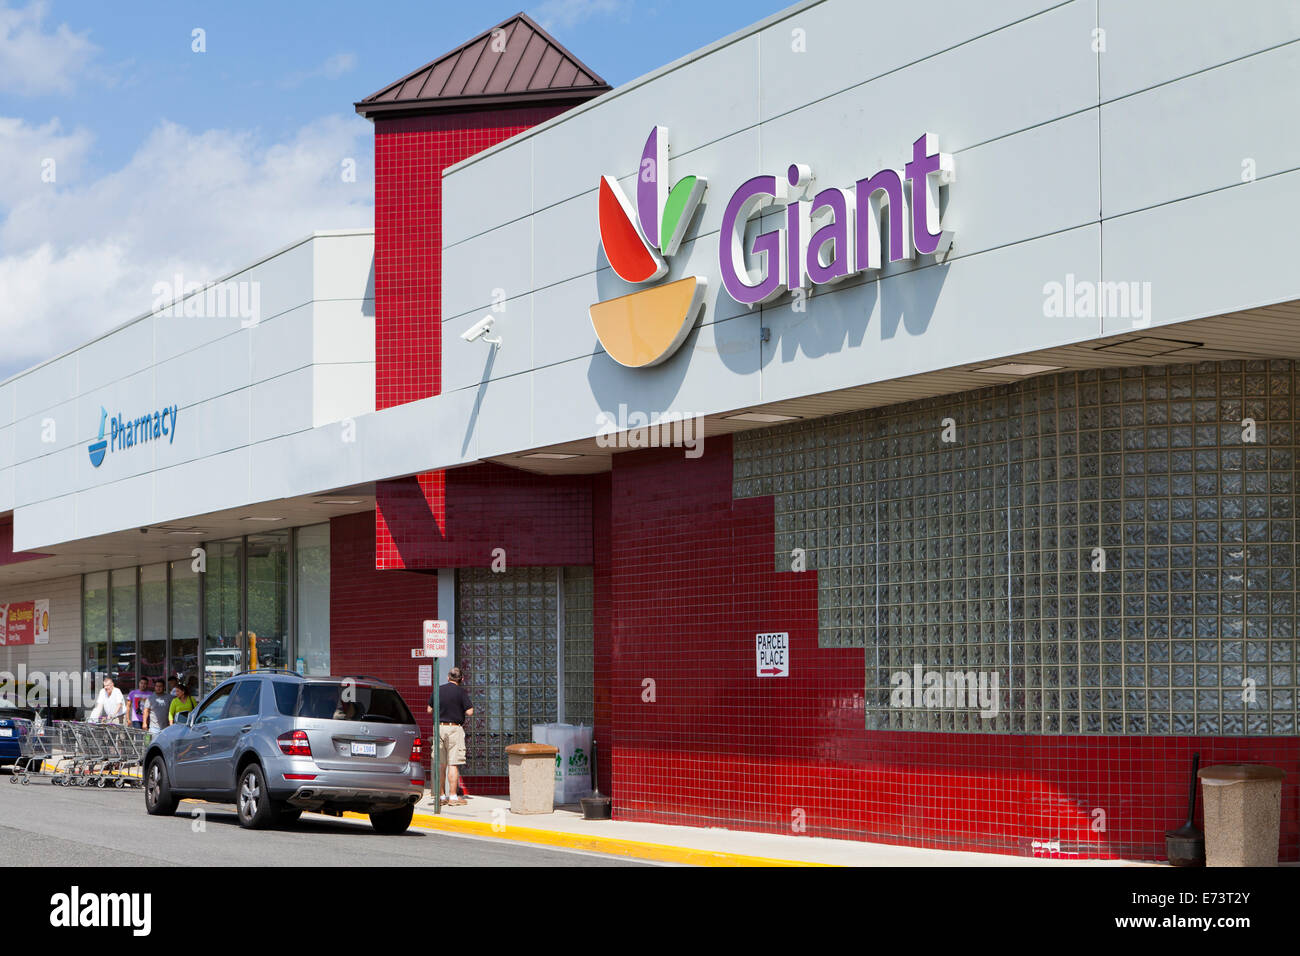 Giant Foods - Virginia USA Banque D'Images